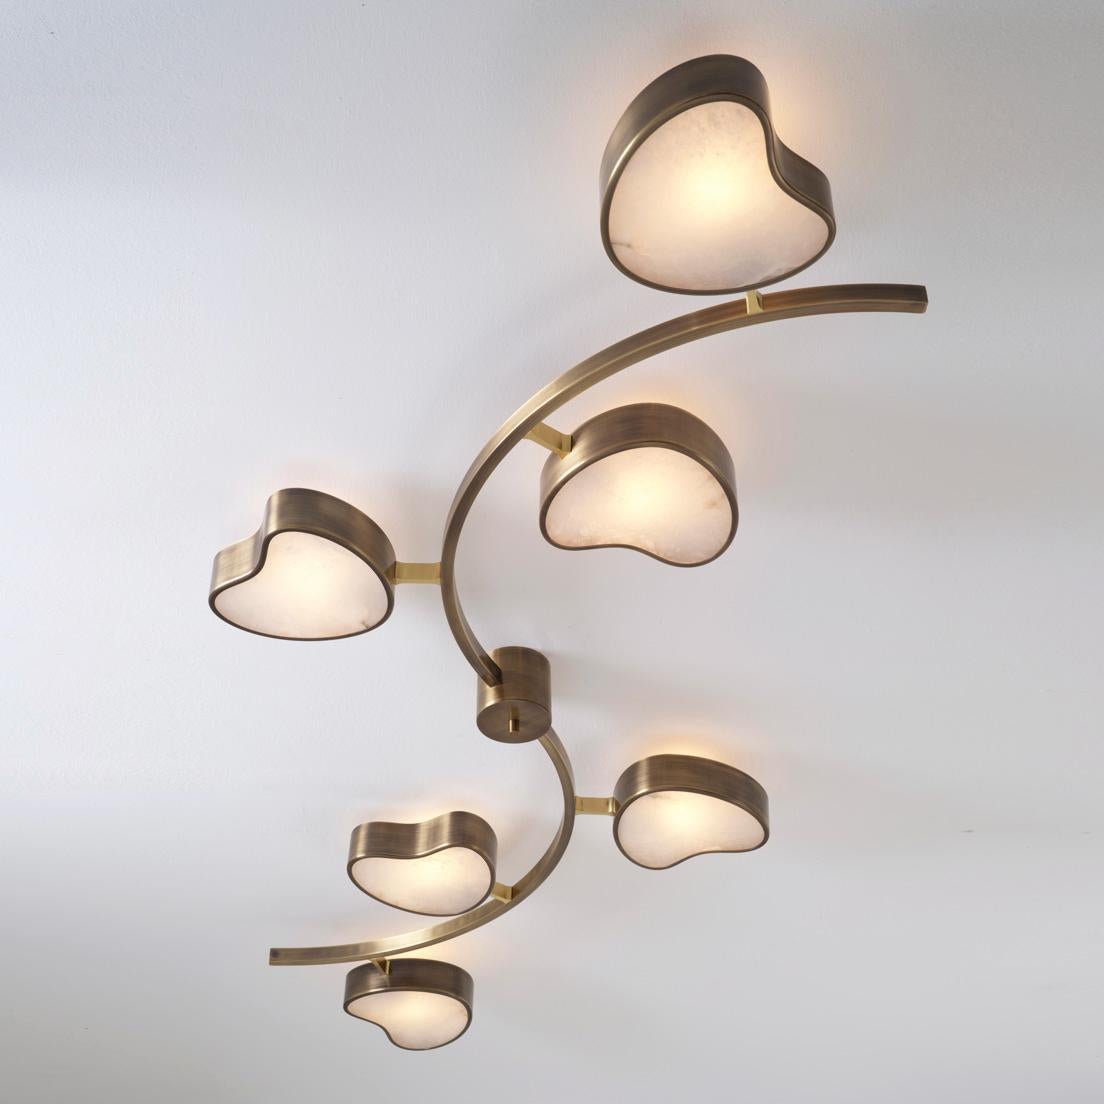 Cuore N.6 Ceiling Light by Gaspare Asaro. Satin Brass and Sand White Finish For Sale 1